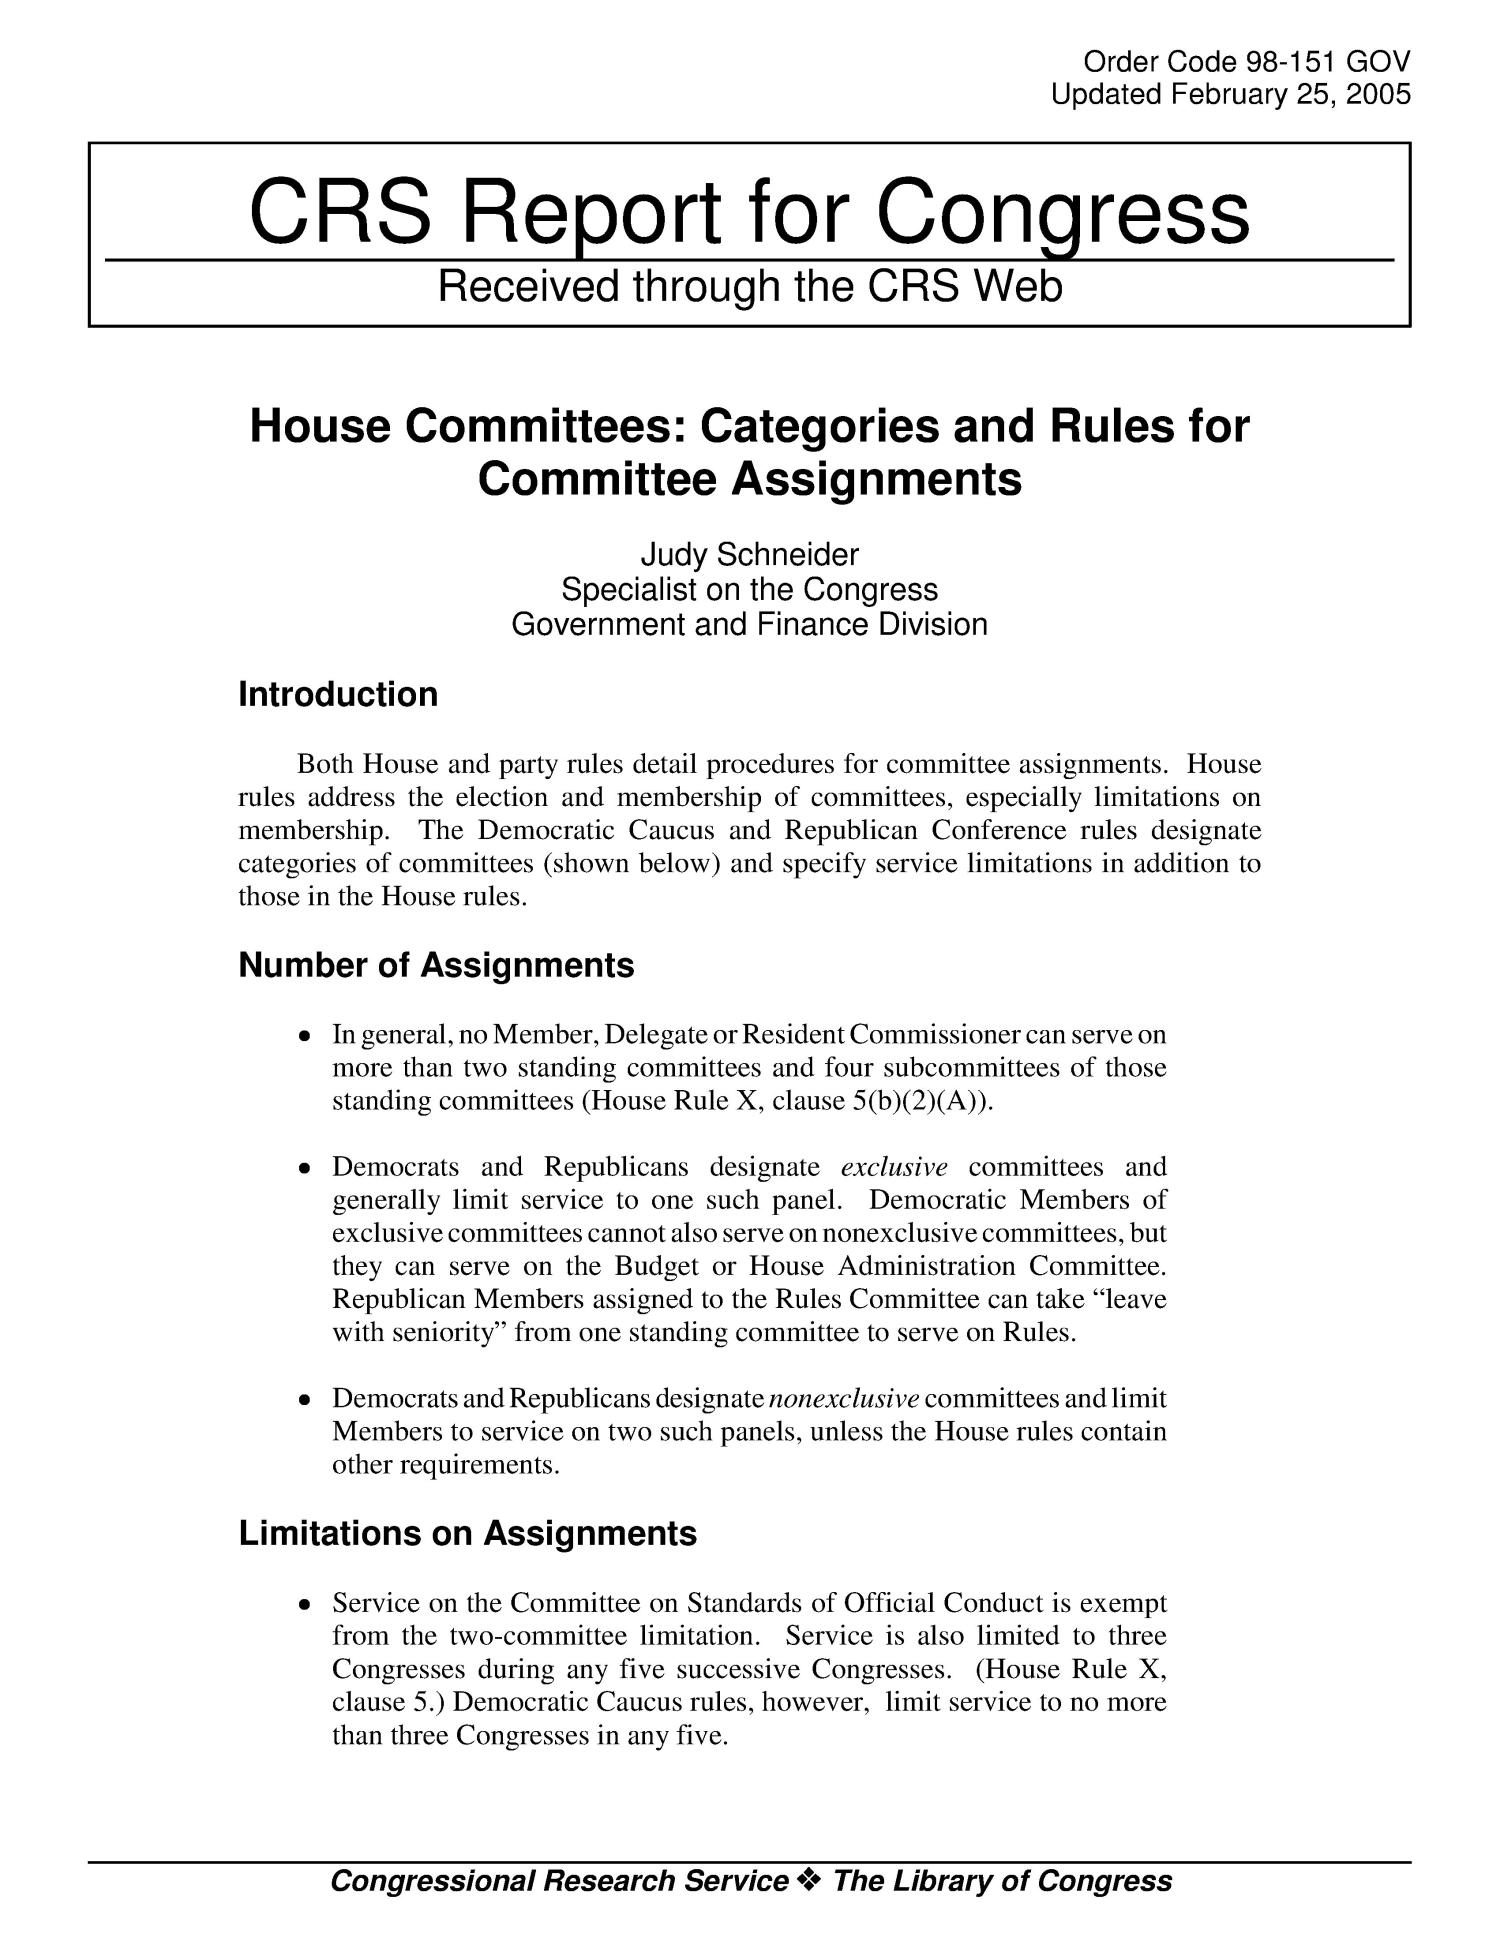 house committee assignment